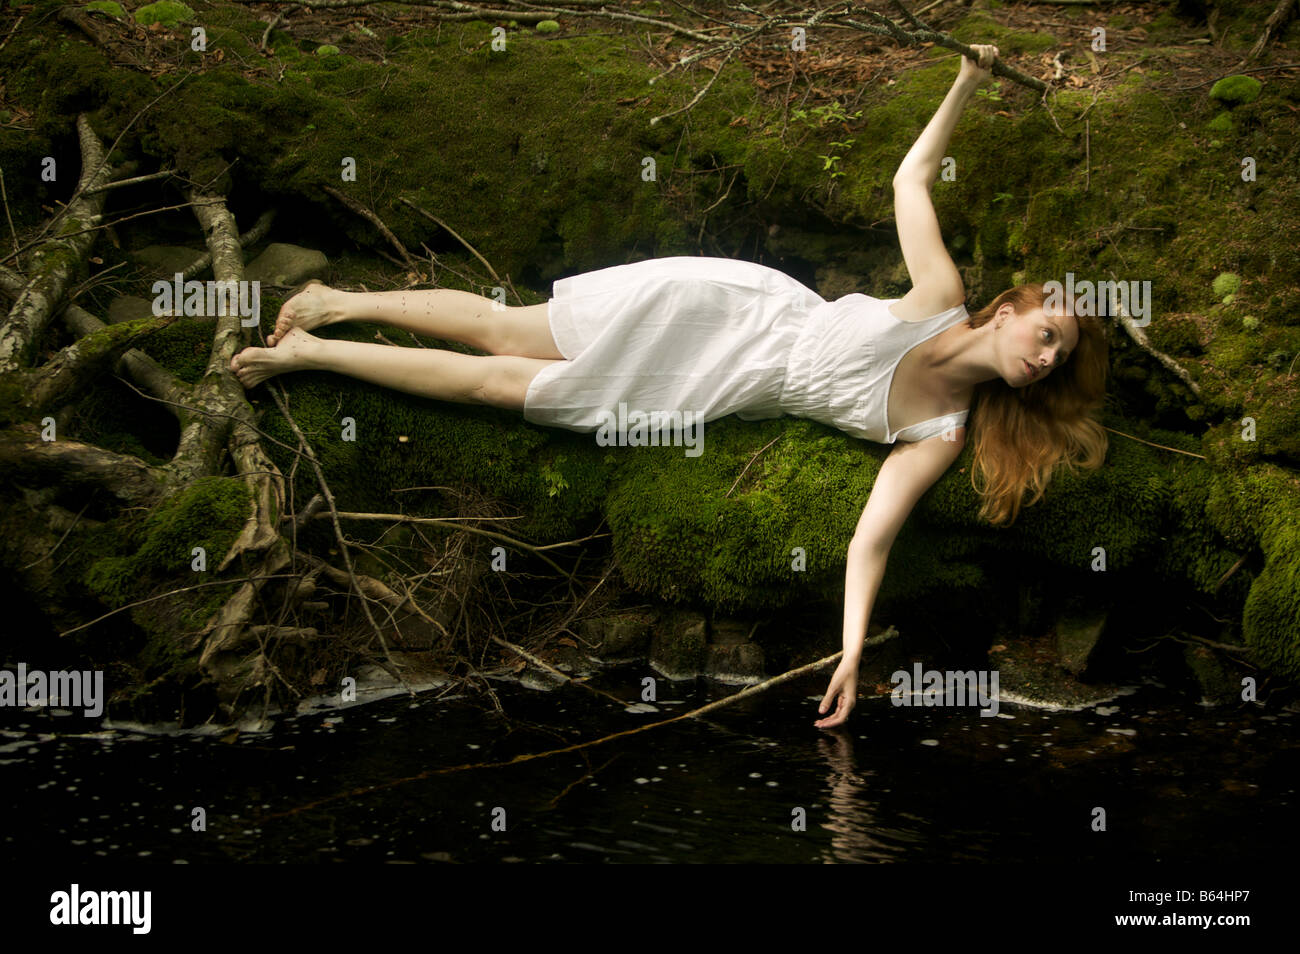 Strawberry blonde woman in diaphanous white cotton slip dress lies adrift at river's edge on a bed of soft green moss. Stock Photo